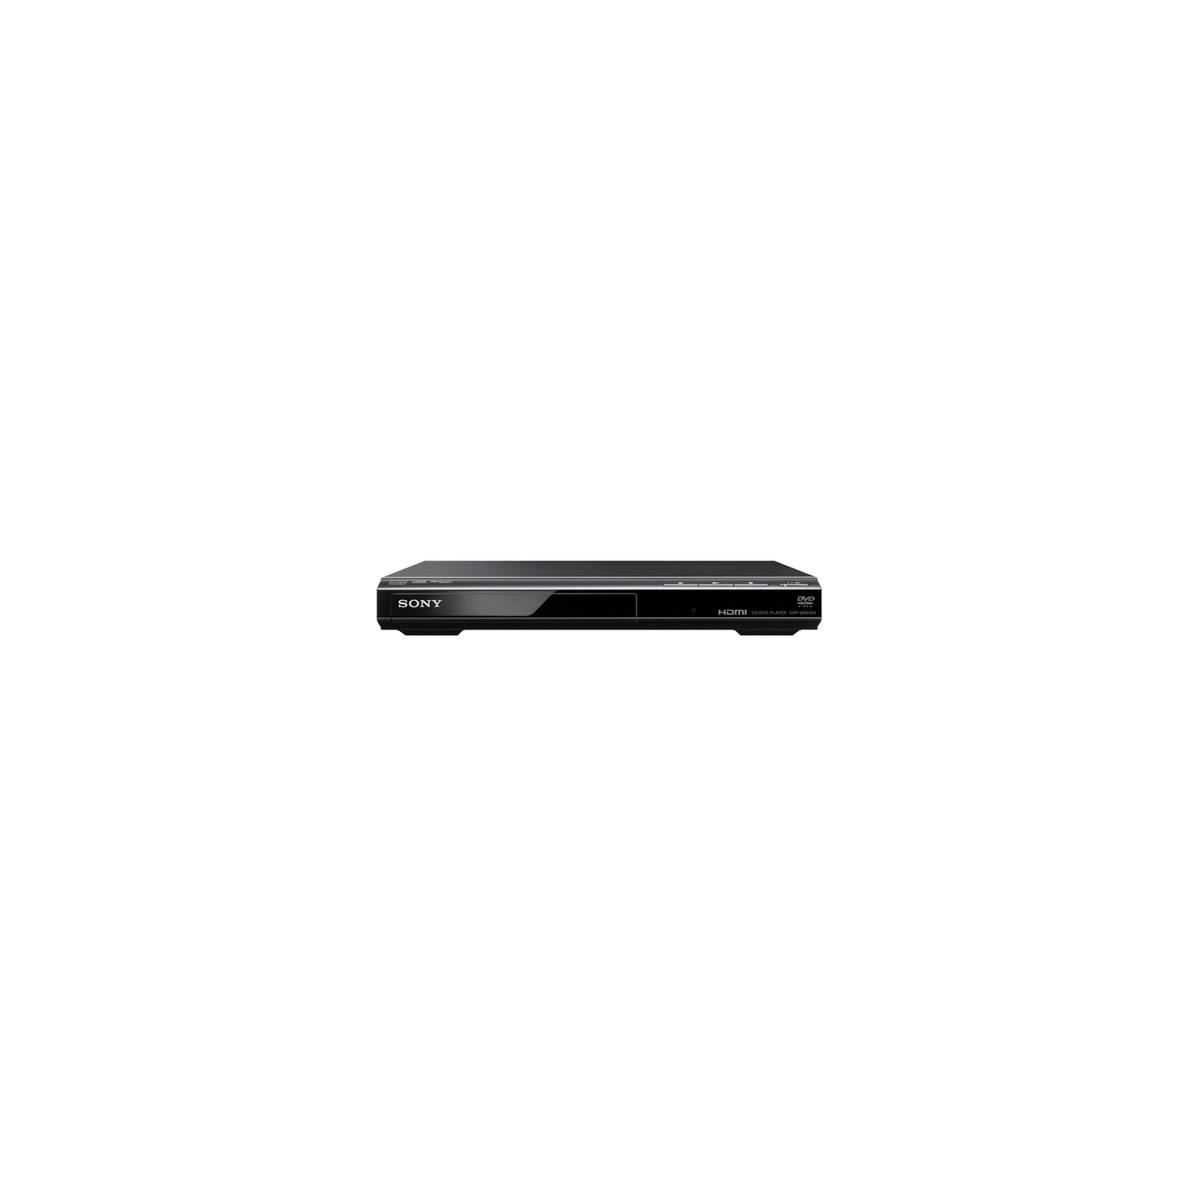 Image of Sony DVP-SR510H 1080p Upscaling DVD Player